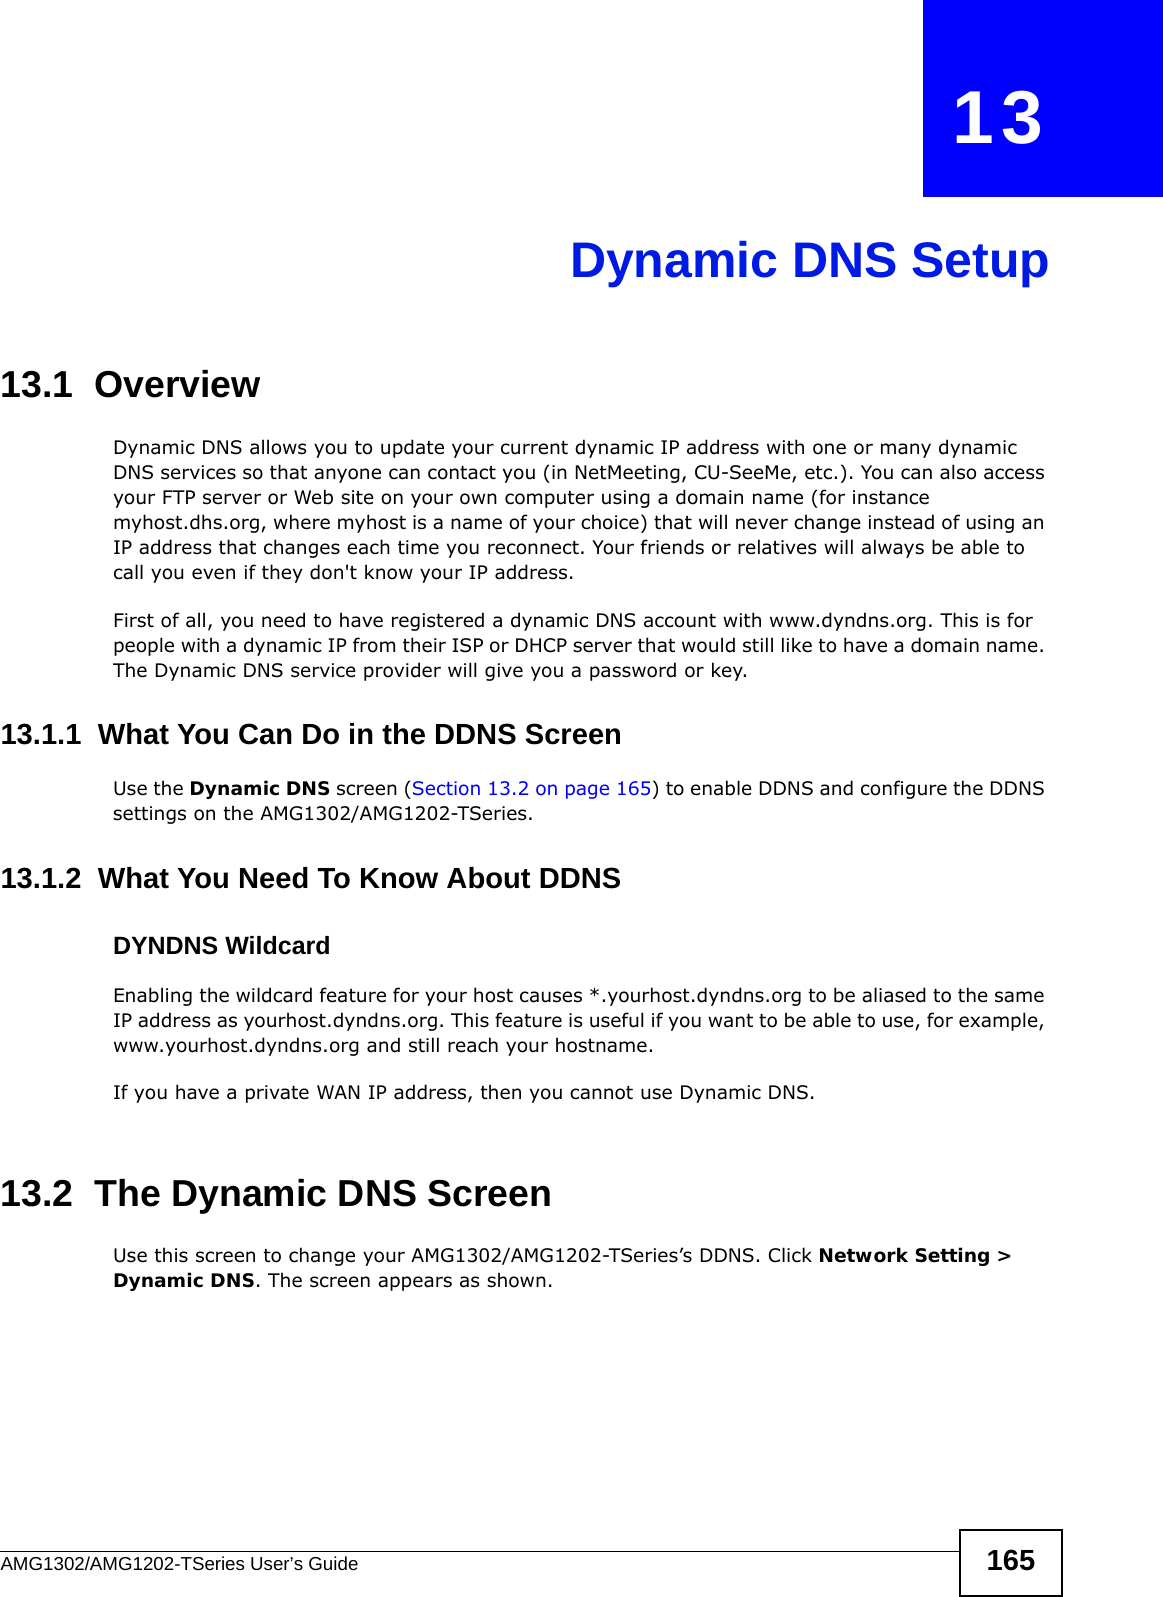 AMG1302/AMG1202-TSeries User’s Guide 165CHAPTER   13Dynamic DNS Setup13.1  Overview Dynamic DNS allows you to update your current dynamic IP address with one or many dynamic DNS services so that anyone can contact you (in NetMeeting, CU-SeeMe, etc.). You can also access your FTP server or Web site on your own computer using a domain name (for instance myhost.dhs.org, where myhost is a name of your choice) that will never change instead of using an IP address that changes each time you reconnect. Your friends or relatives will always be able to call you even if they don&apos;t know your IP address.First of all, you need to have registered a dynamic DNS account with www.dyndns.org. This is for people with a dynamic IP from their ISP or DHCP server that would still like to have a domain name. The Dynamic DNS service provider will give you a password or key. 13.1.1  What You Can Do in the DDNS ScreenUse the Dynamic DNS screen (Section 13.2 on page 165) to enable DDNS and configure the DDNS settings on the AMG1302/AMG1202-TSeries.13.1.2  What You Need To Know About DDNSDYNDNS WildcardEnabling the wildcard feature for your host causes *.yourhost.dyndns.org to be aliased to the same IP address as yourhost.dyndns.org. This feature is useful if you want to be able to use, for example, www.yourhost.dyndns.org and still reach your hostname.If you have a private WAN IP address, then you cannot use Dynamic DNS.13.2  The Dynamic DNS ScreenUse this screen to change your AMG1302/AMG1202-TSeries’s DDNS. Click Network Setting &gt; Dynamic DNS. The screen appears as shown.